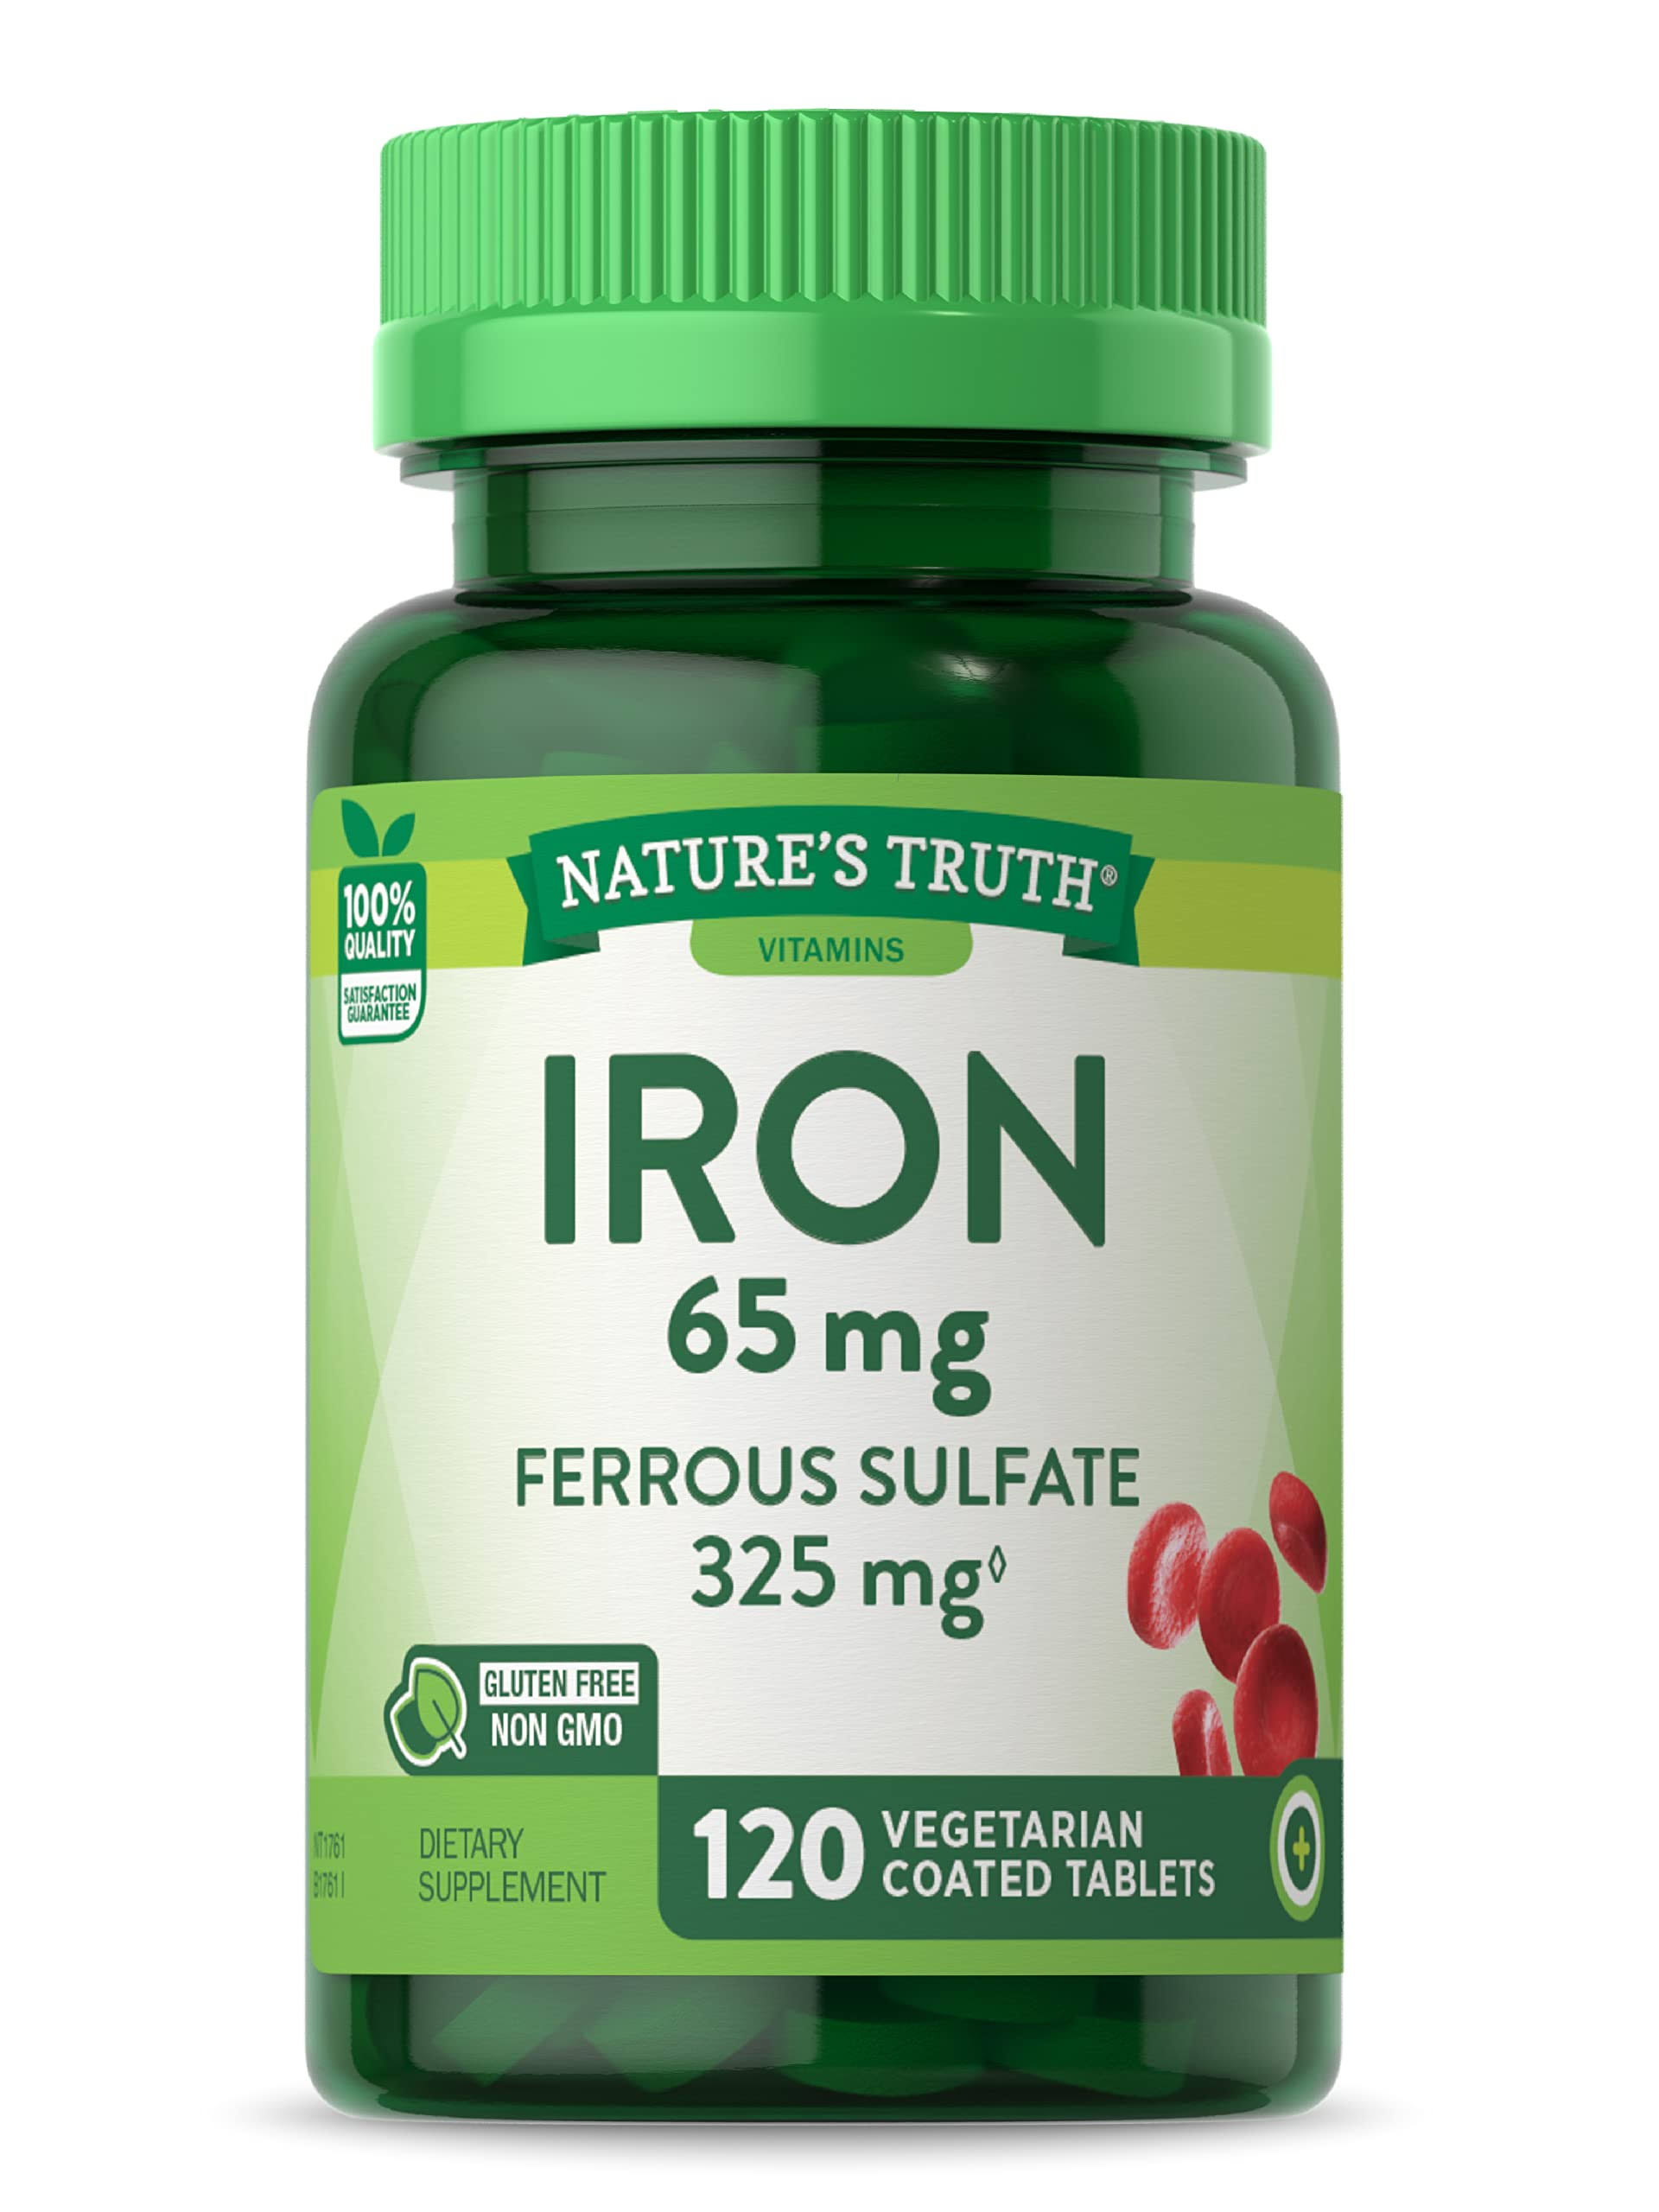 Nature's Truth Ferrous Sulfate Iron 65 mg Supplement - 120 Count